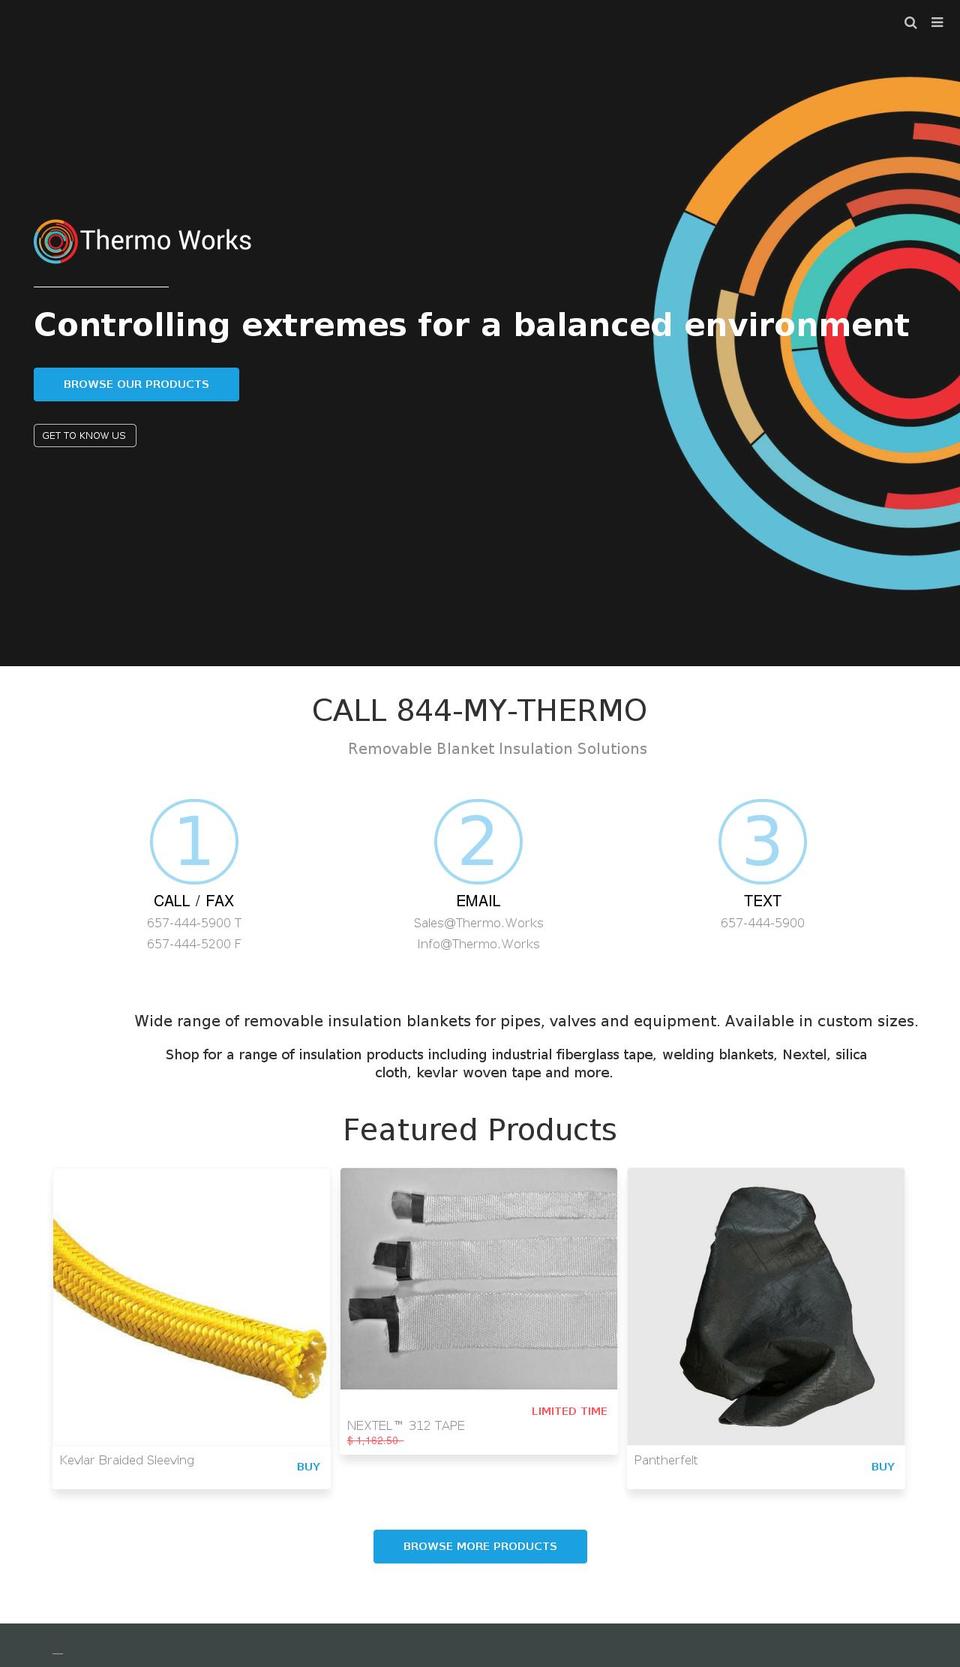 California Shopify theme site example thermoworks.us